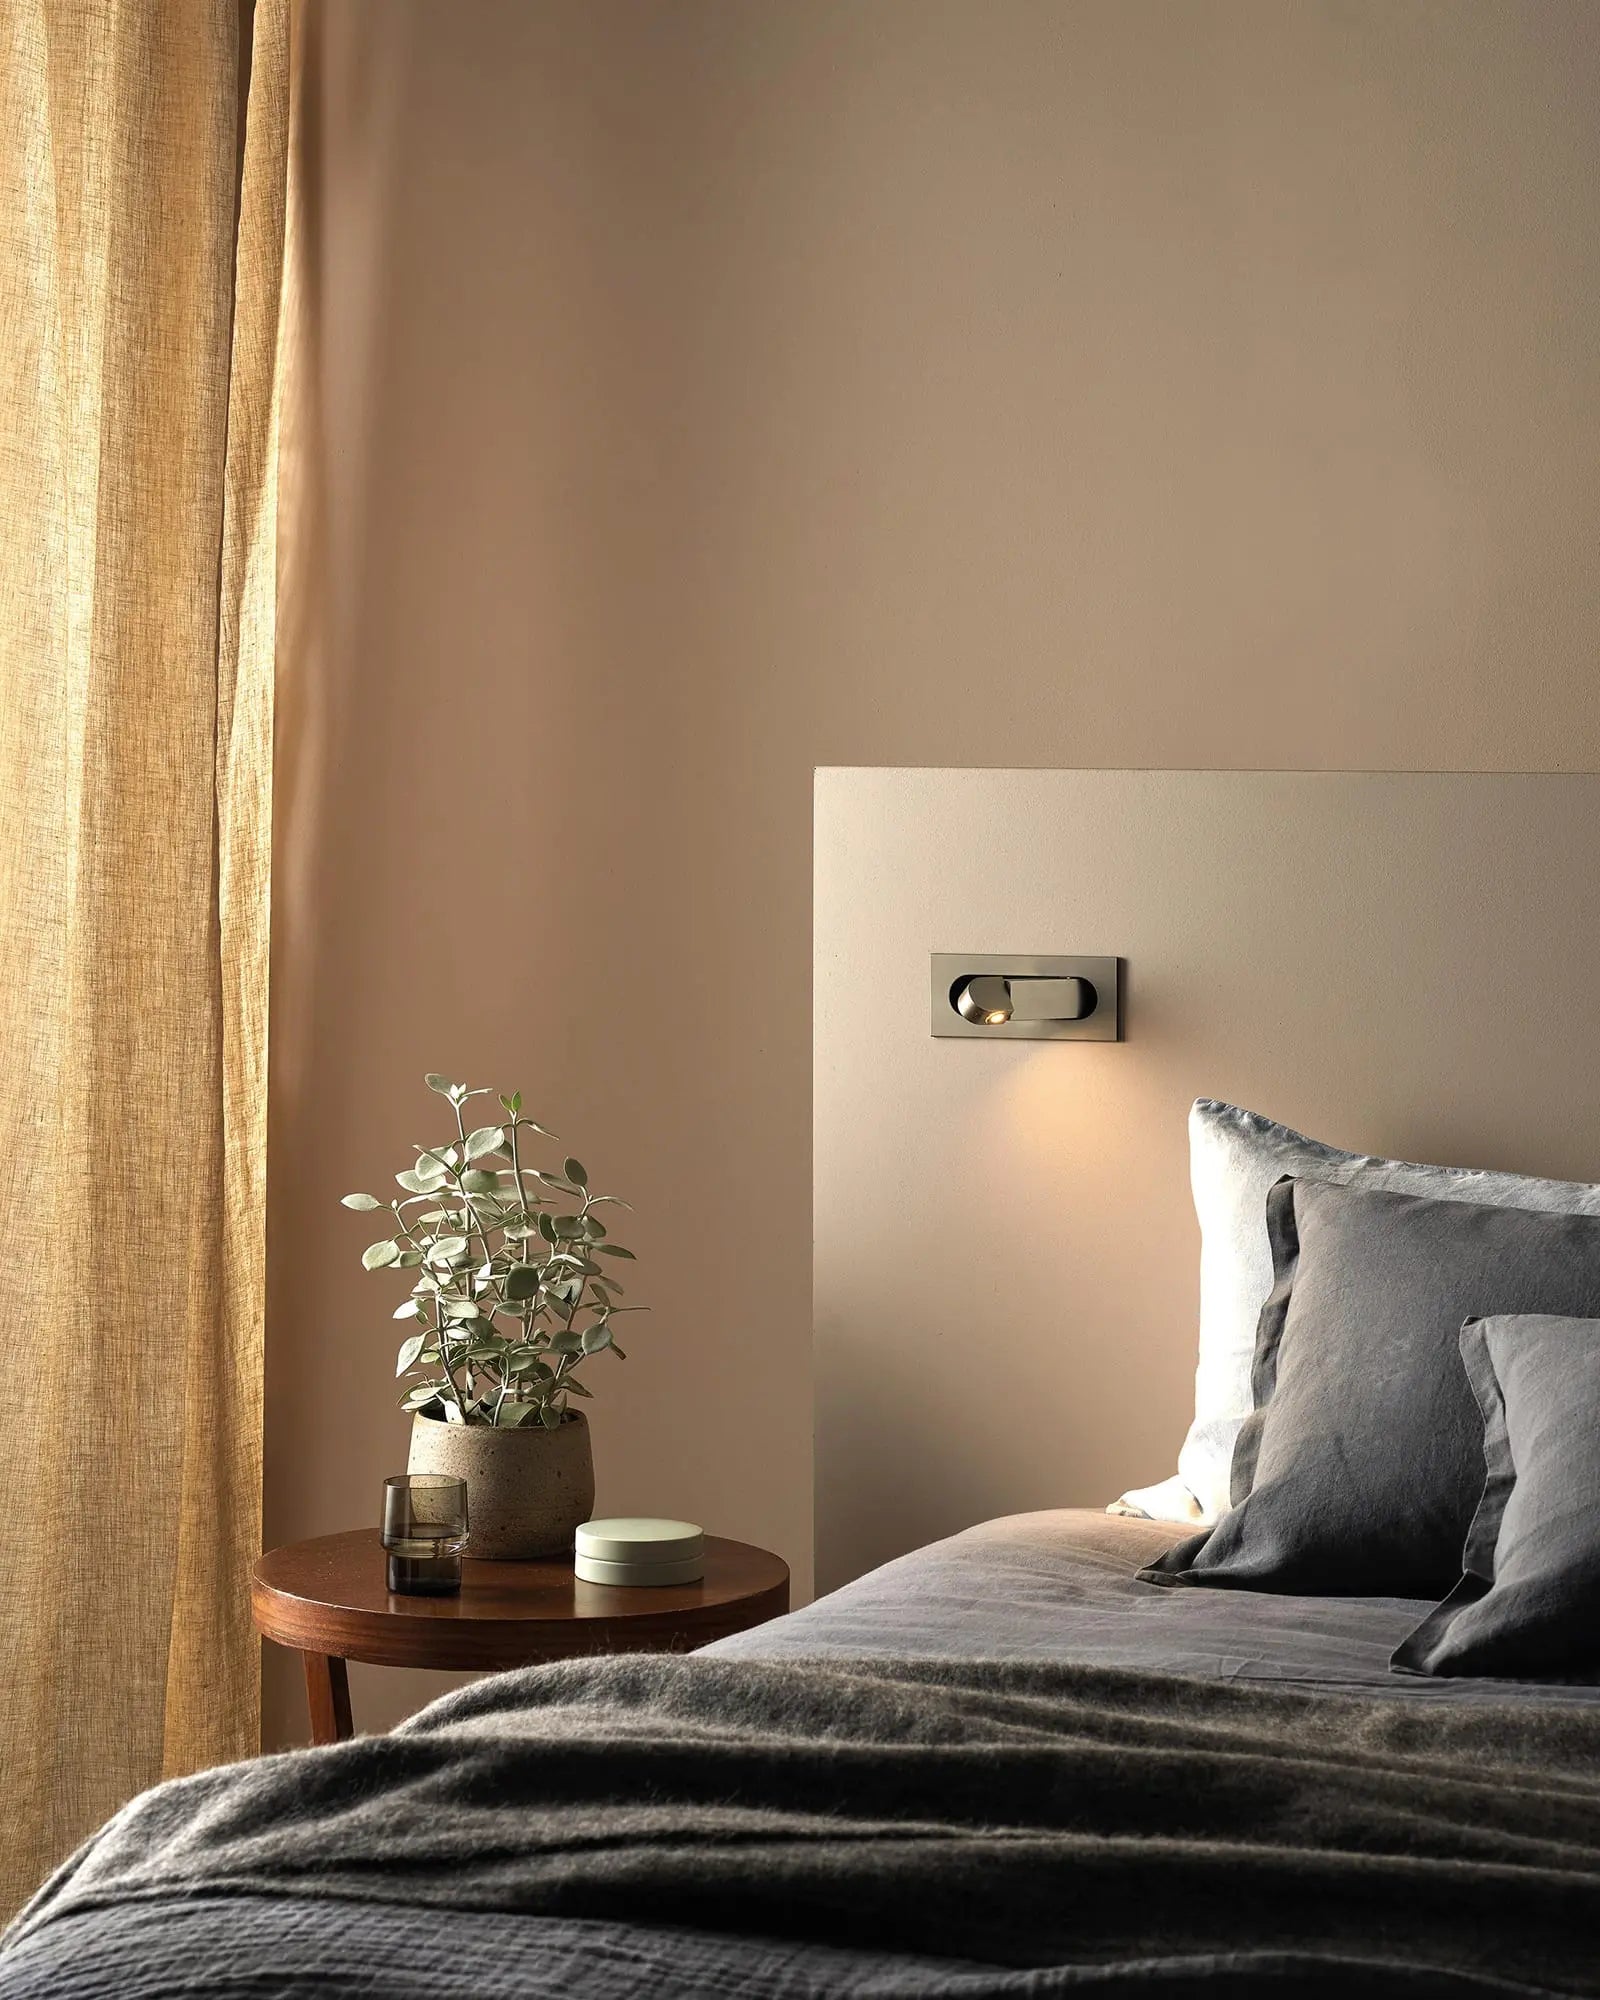 Digit wall light minimalistic indoor small foldable on the bed side